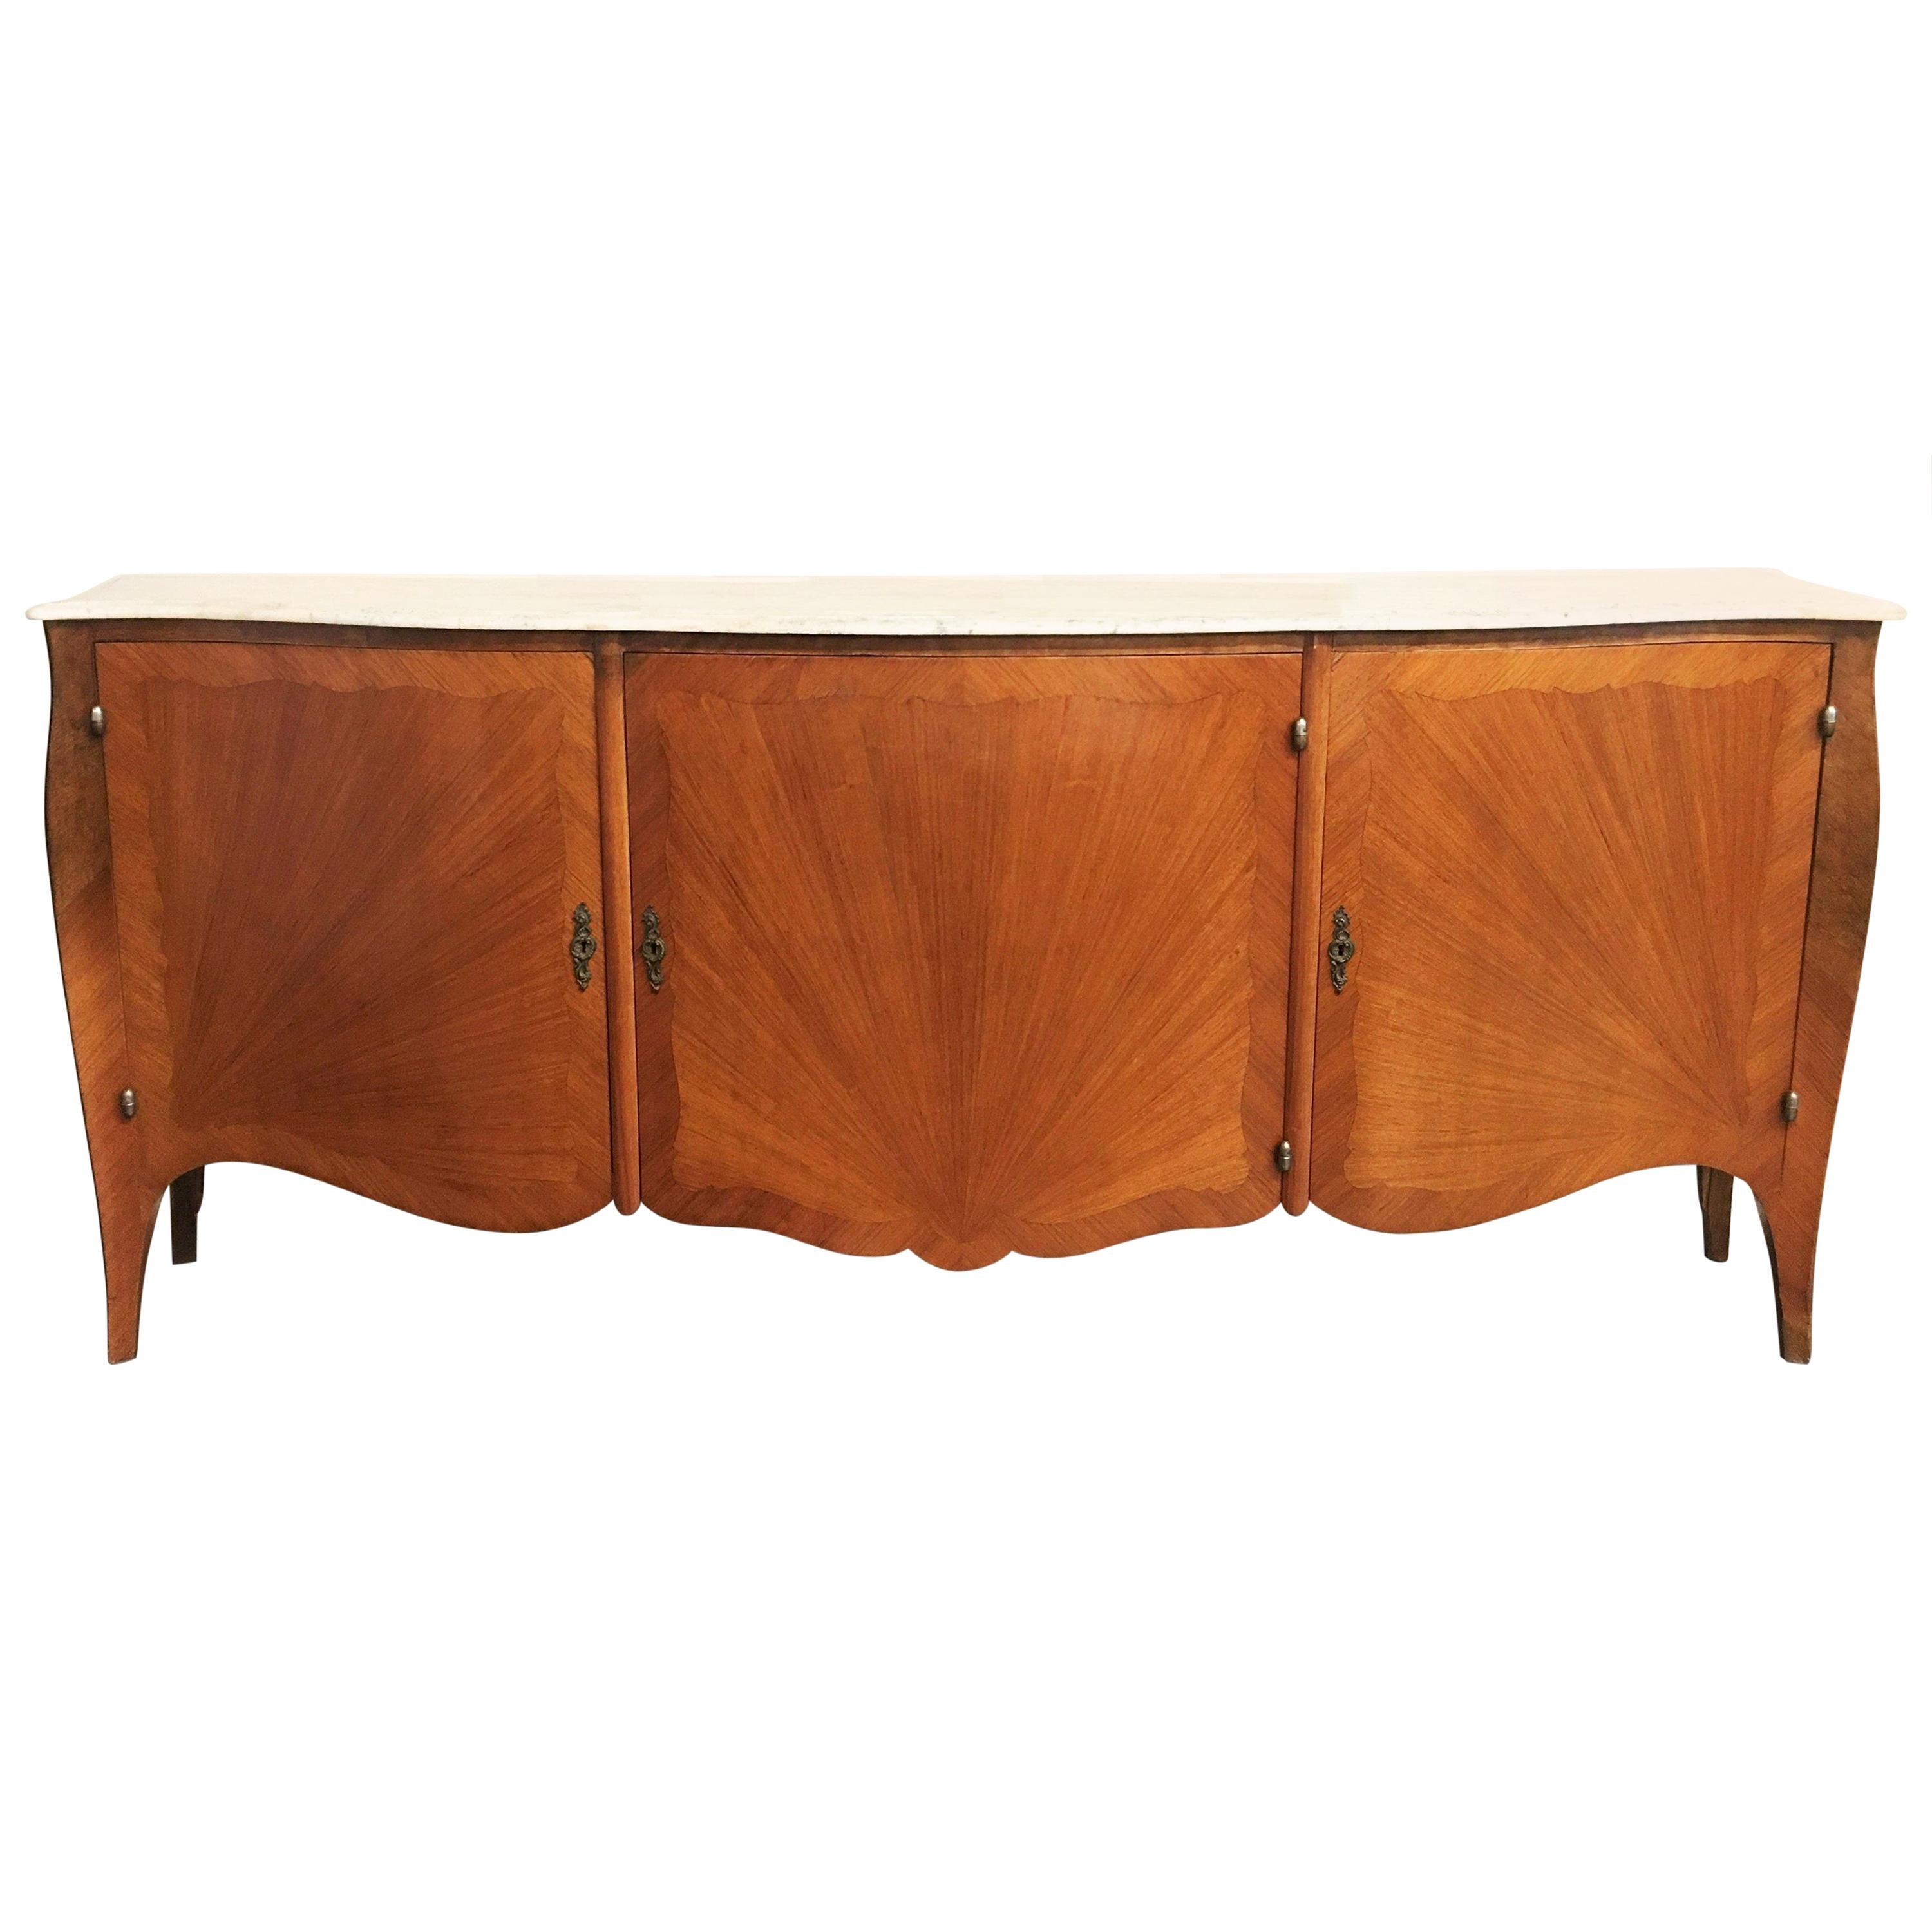 Elegant French Parquetry Three-Door Marble-Top Buffet or Sideboard